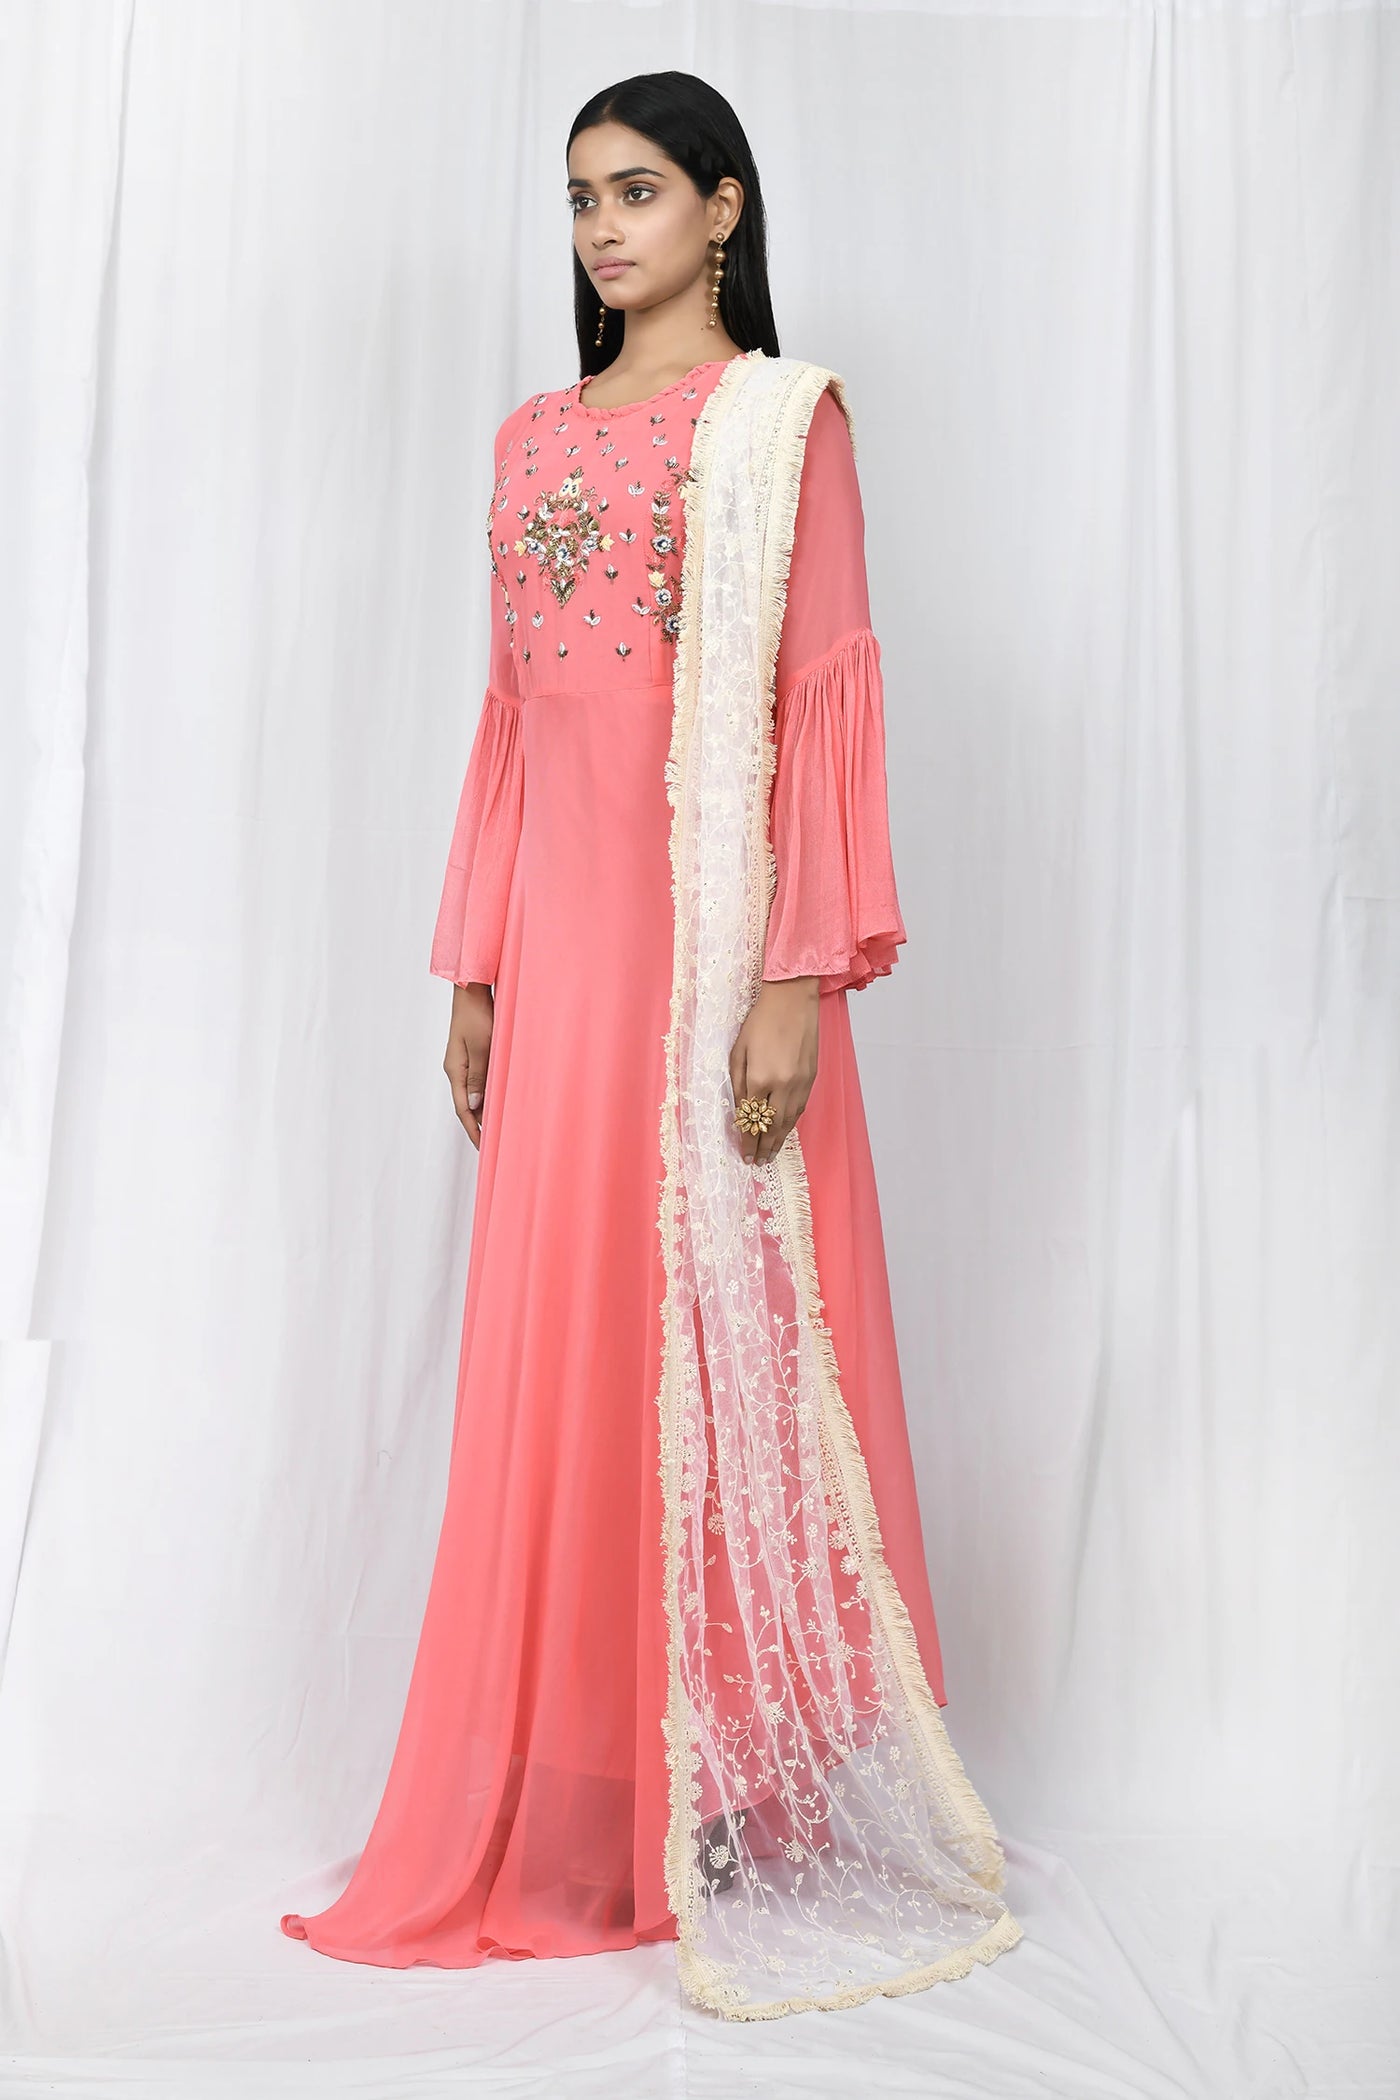 Pink Georgette Anarkali - Indian Clothing in Denver, CO, Aurora, CO, Boulder, CO, Fort Collins, CO, Colorado Springs, CO, Parker, CO, Highlands Ranch, CO, Cherry Creek, CO, Centennial, CO, and Longmont, CO. Nationwide shipping USA - India Fashion X